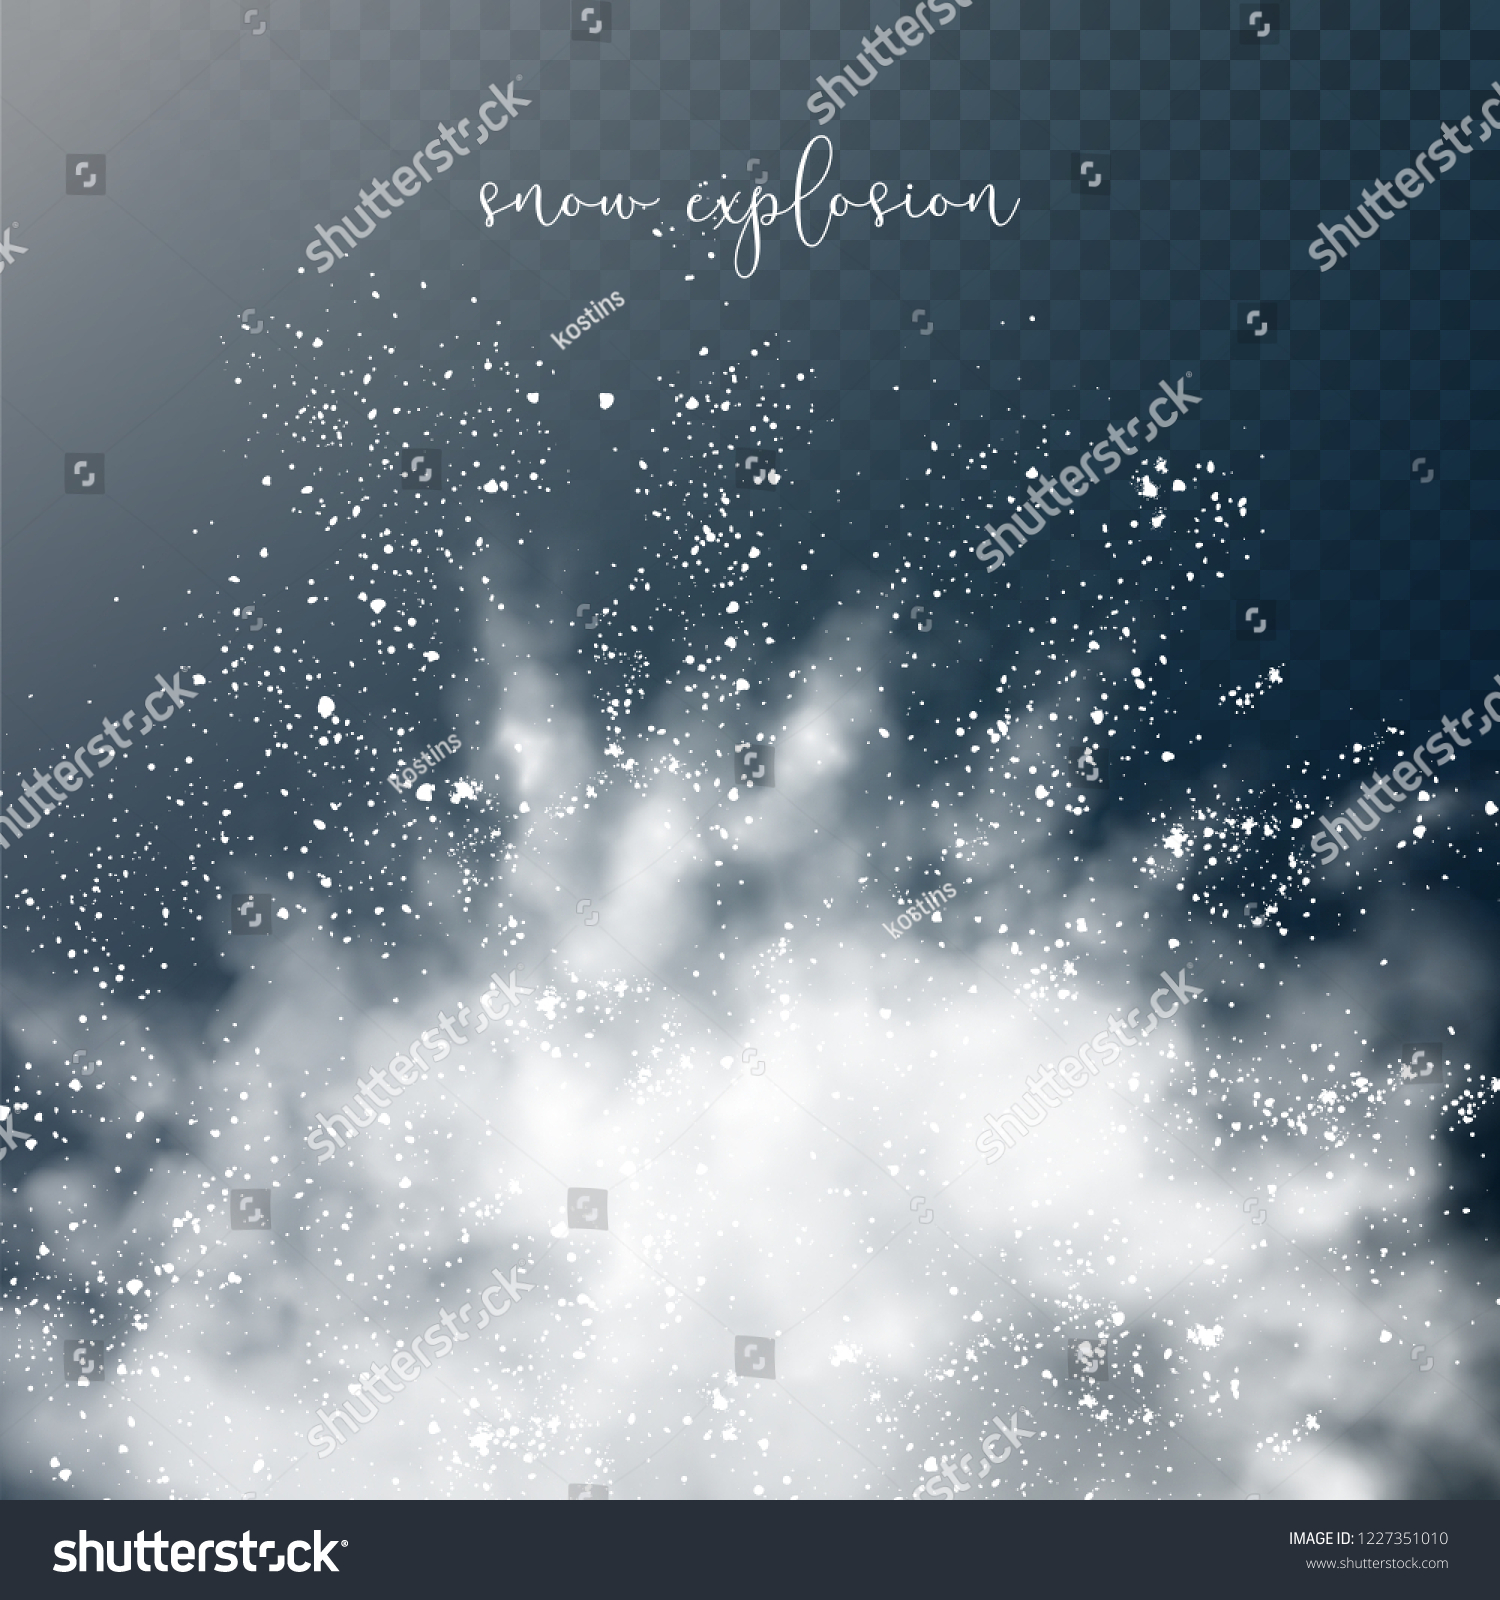 Vector snow explosion. Abstract design of white transparent cloud and snowflakes. Blast of white powder #1227351010